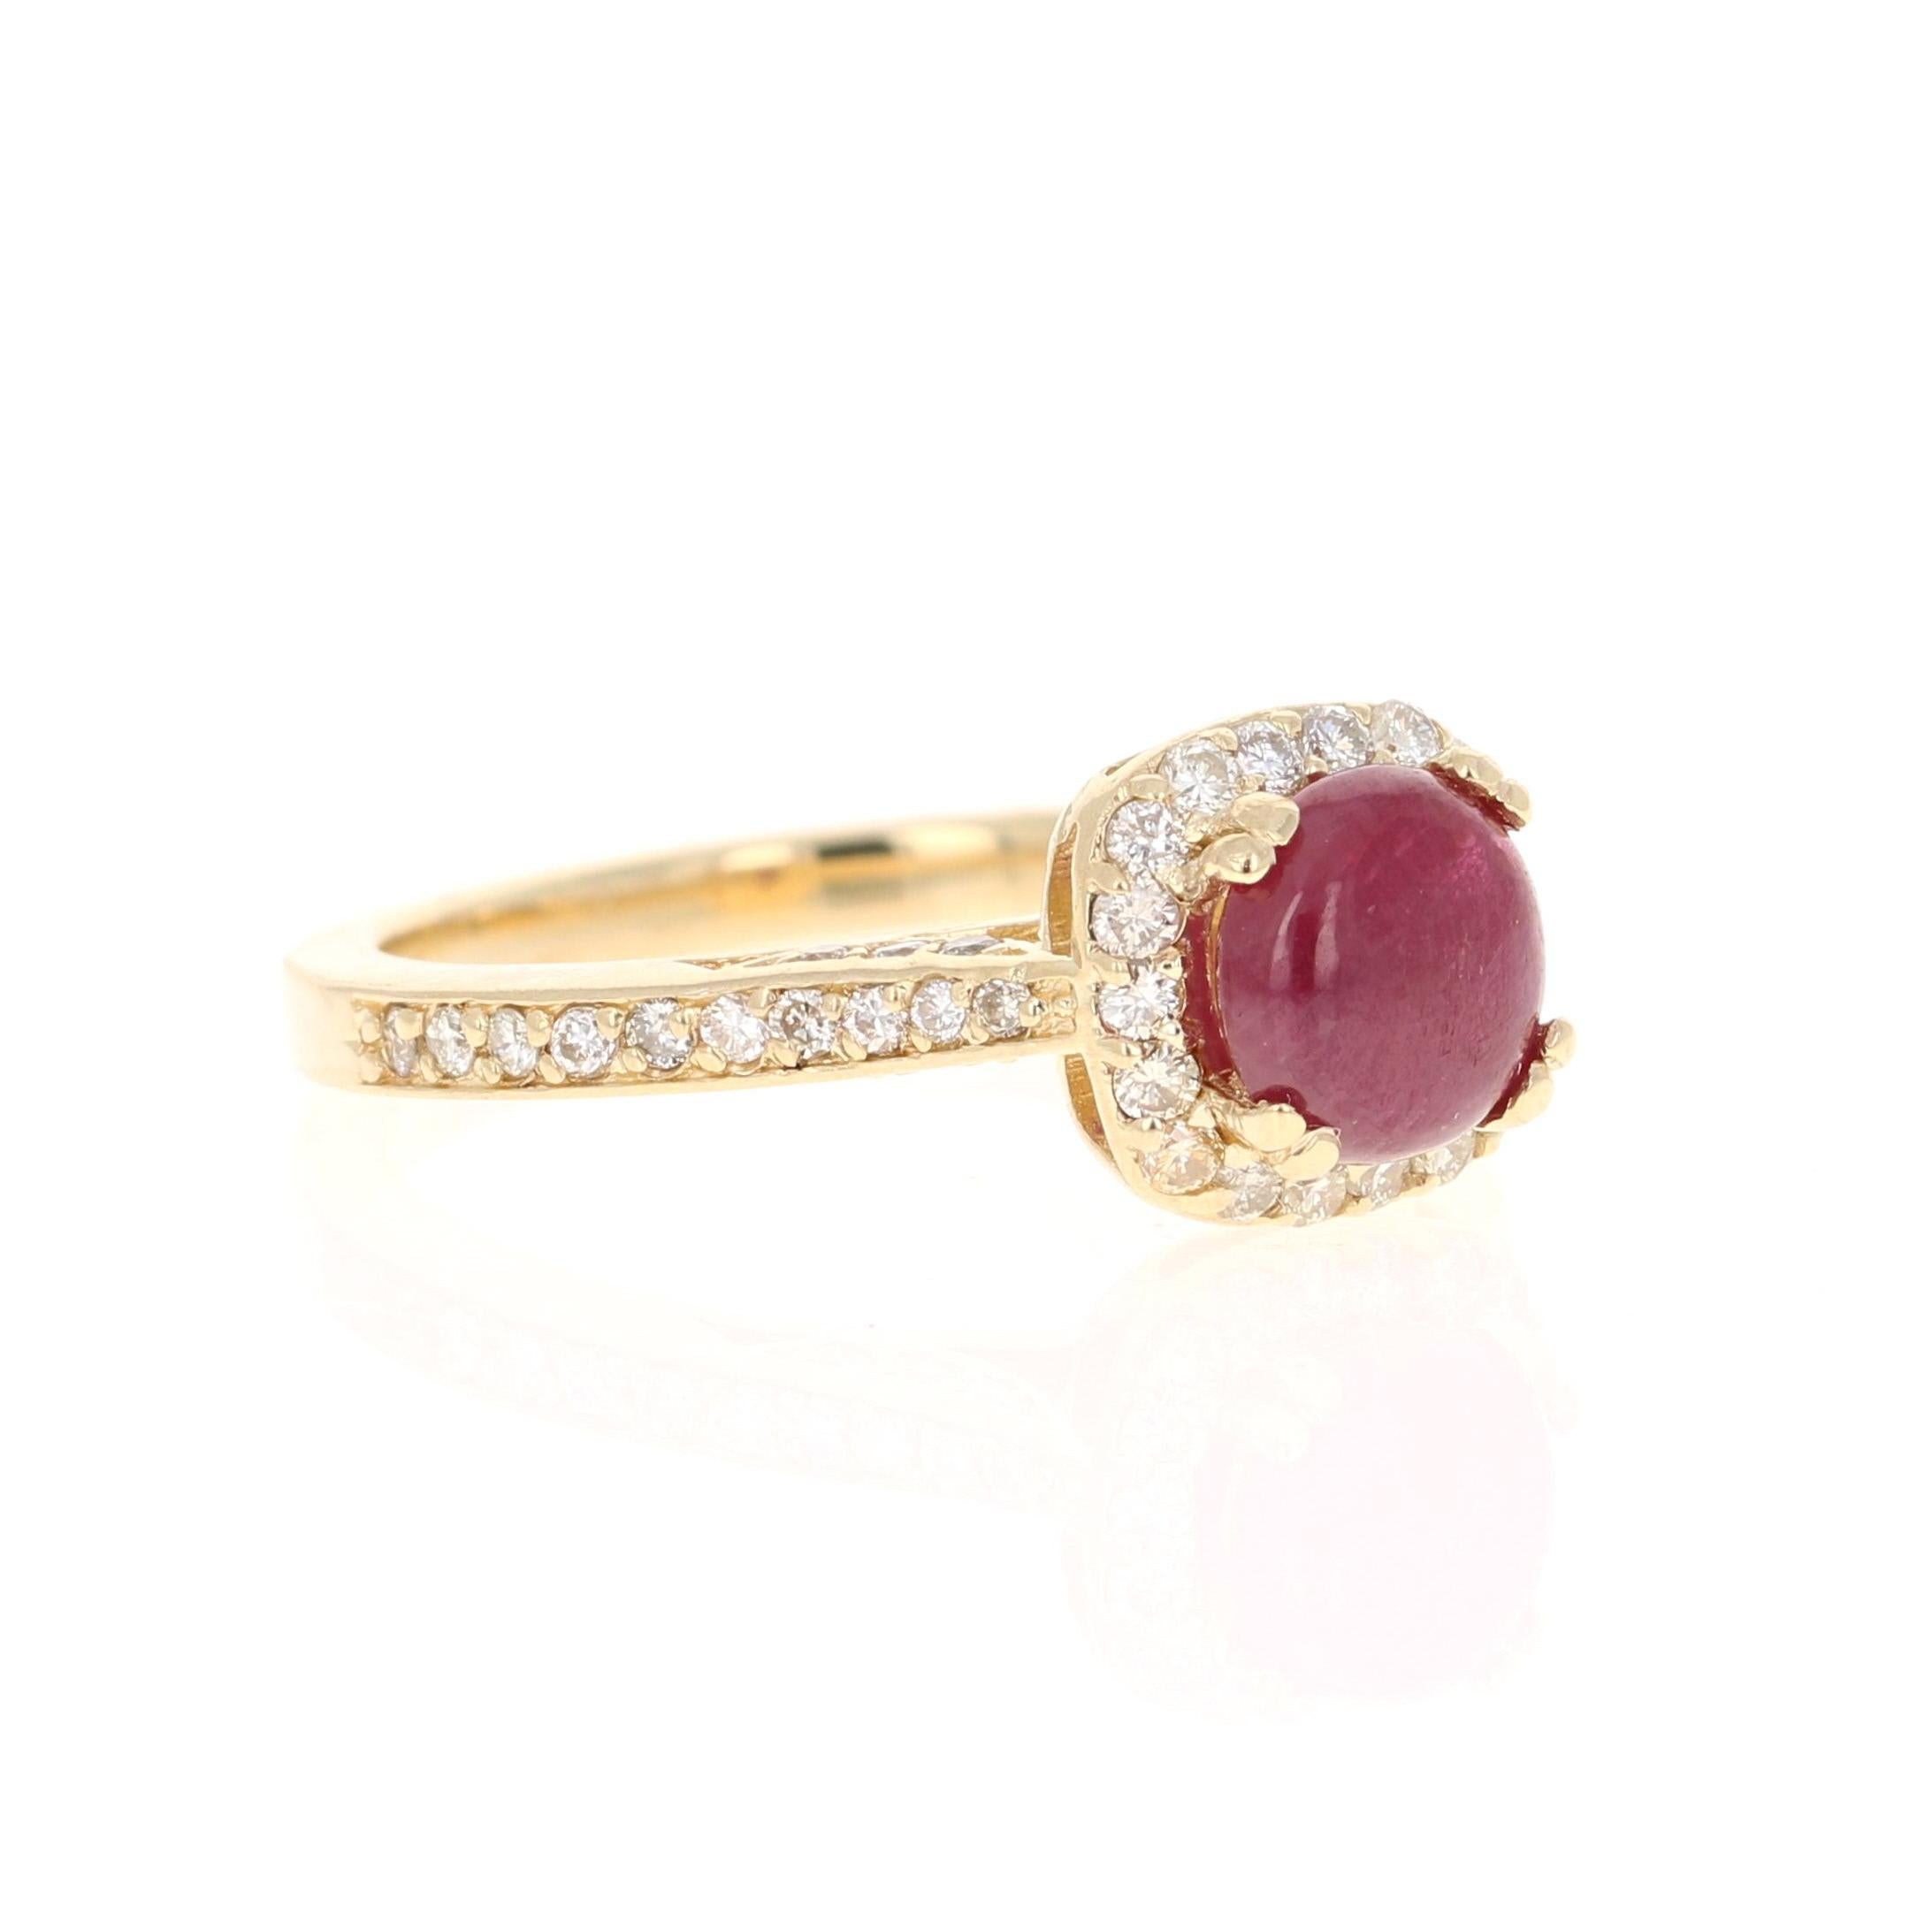 Simply beautiful Ruby Diamond Ring with a Cushion Cut Cabochon 1.43 Carat Ruby which is surrounded by 40 Round Cut Diamonds that weigh 0.50 carats. The total carat weight of the ring is 1.93 carats. 

The ring is curated in 14K Yellow Gold and